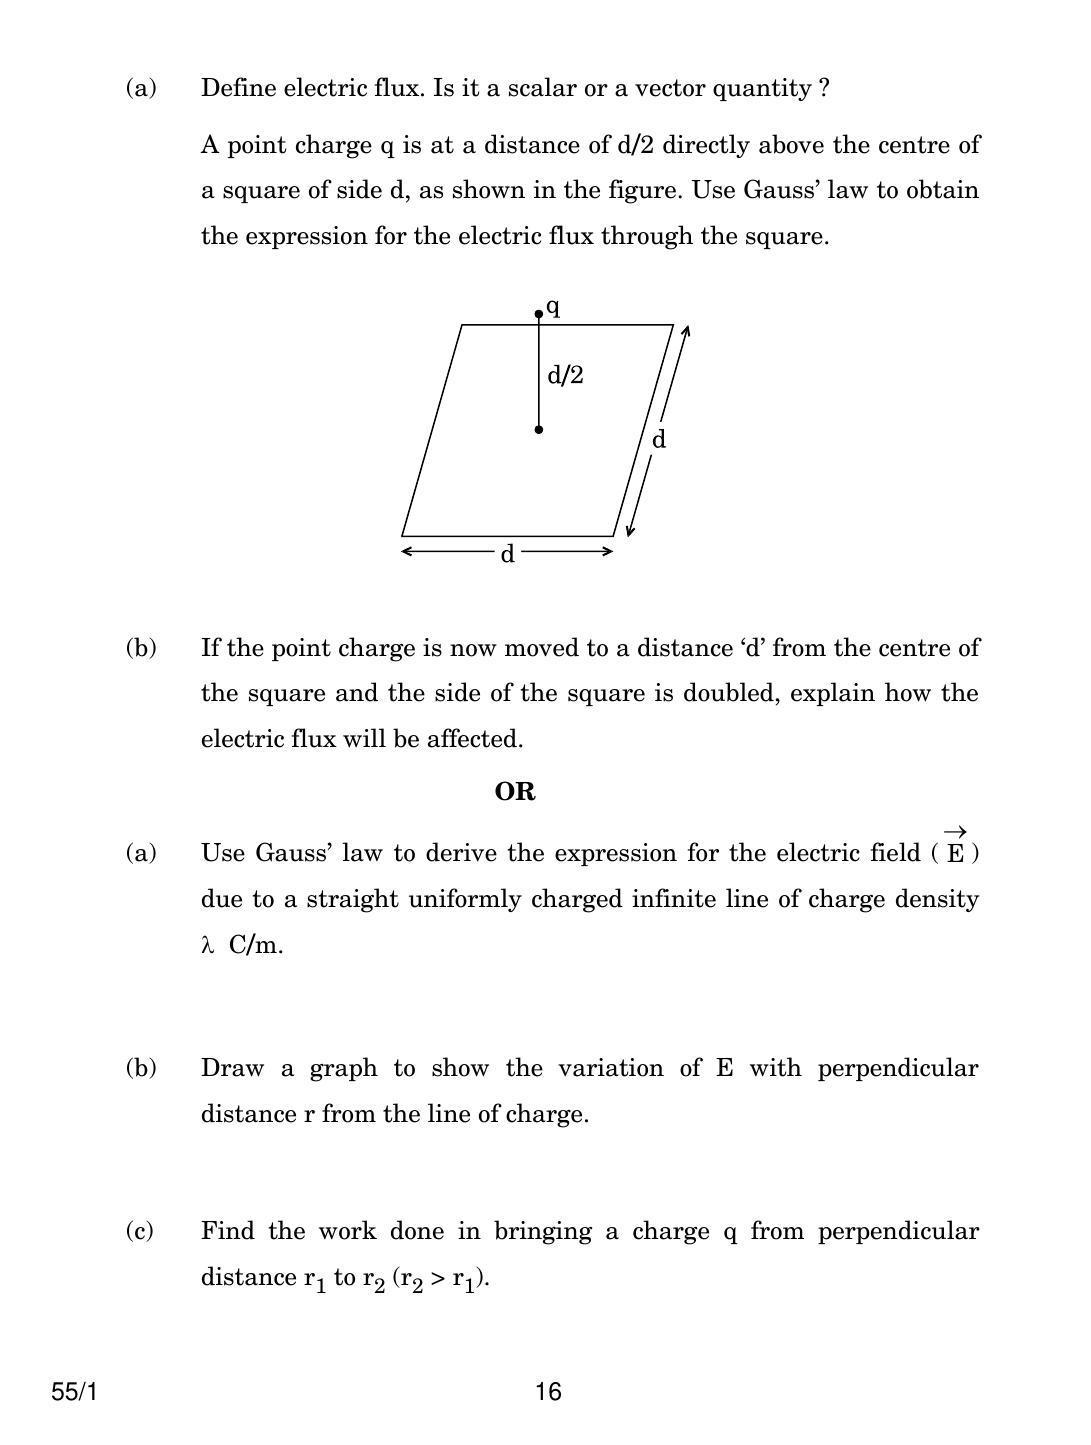 CBSE Class 12 55-1 PHYSICS 2018 Question Paper - Page 16